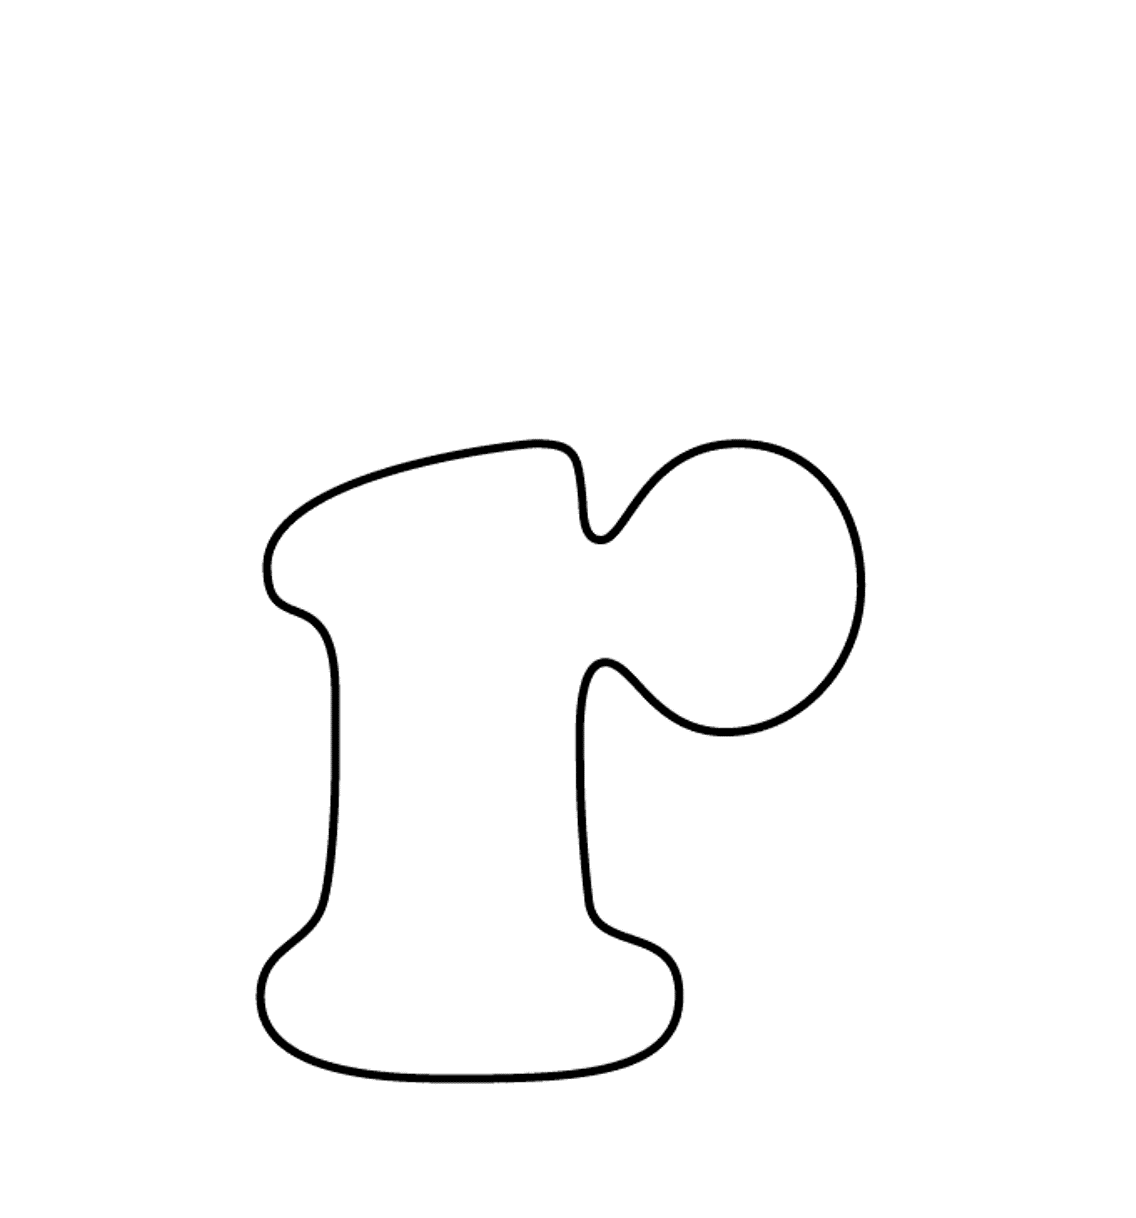 Lowercase e coloring pages download and print for free